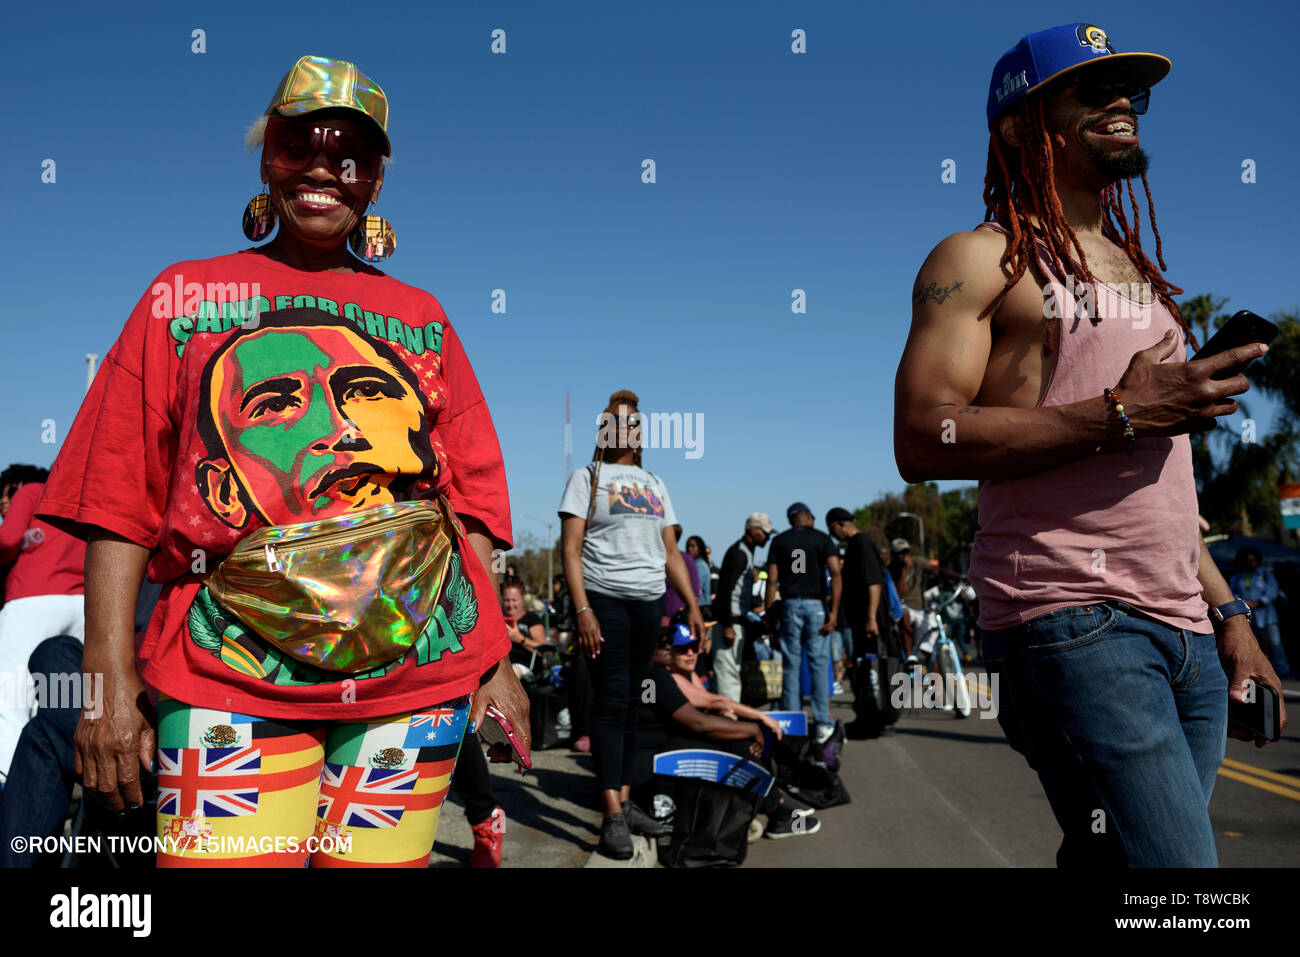 A woman seen smiling during the festival. People gather at a festival celebrating the renaming of Rodeo Road to Obama Boulevard, in honor of former US President Barack Obama in Los Angeles, California. Stock Photo